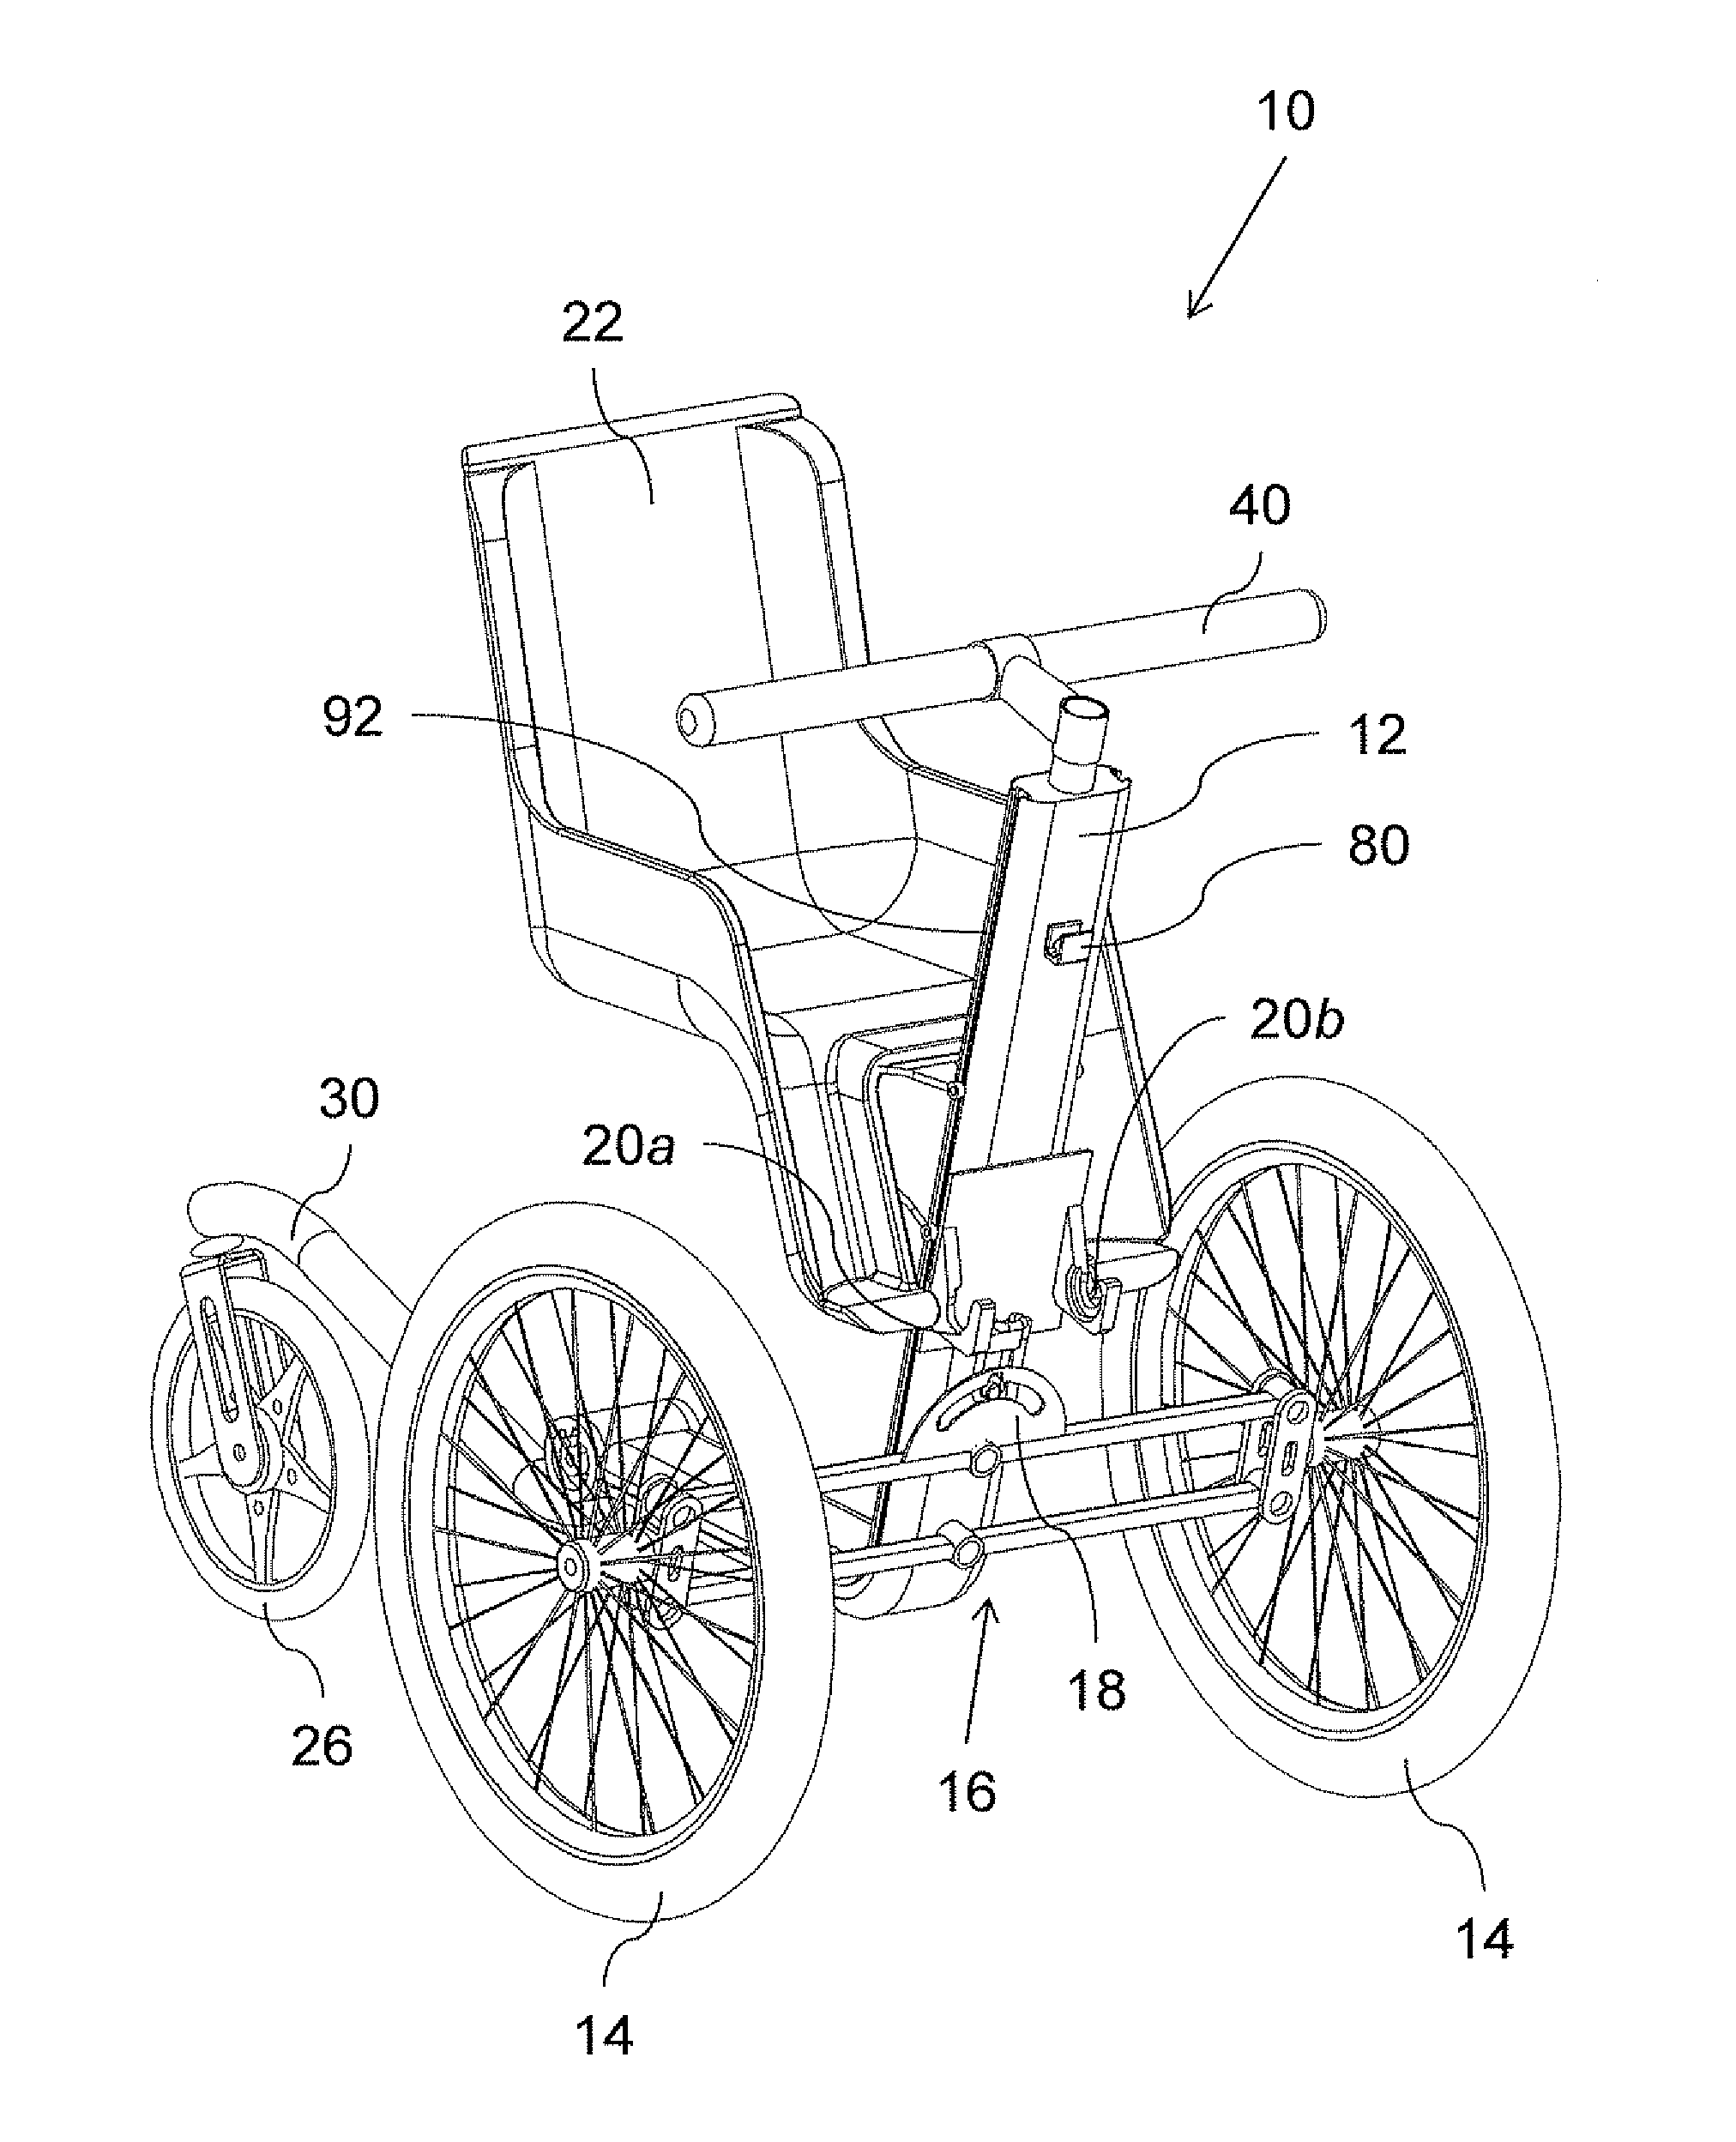 Cart for use with pedal-cycle or other tilt-cornering vehicle